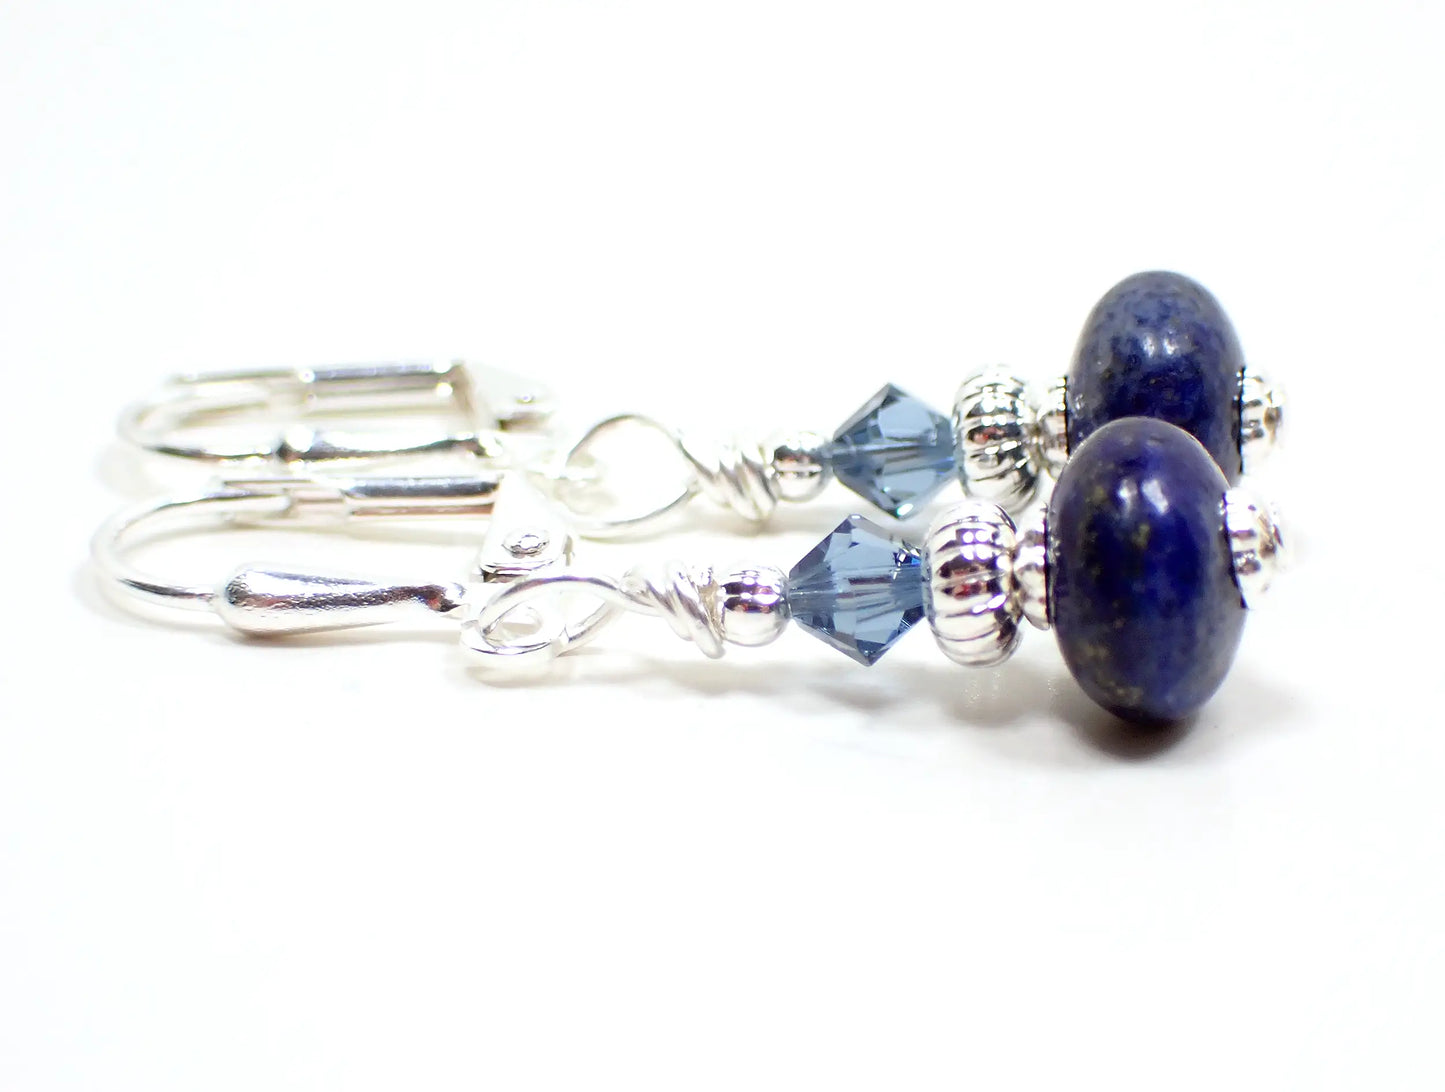 Small Blue Lapis Lazuli Gemstone Handmade Drop Earrings, Boho Jewelry, Silver Plated, Hook Lever Back or Clip On